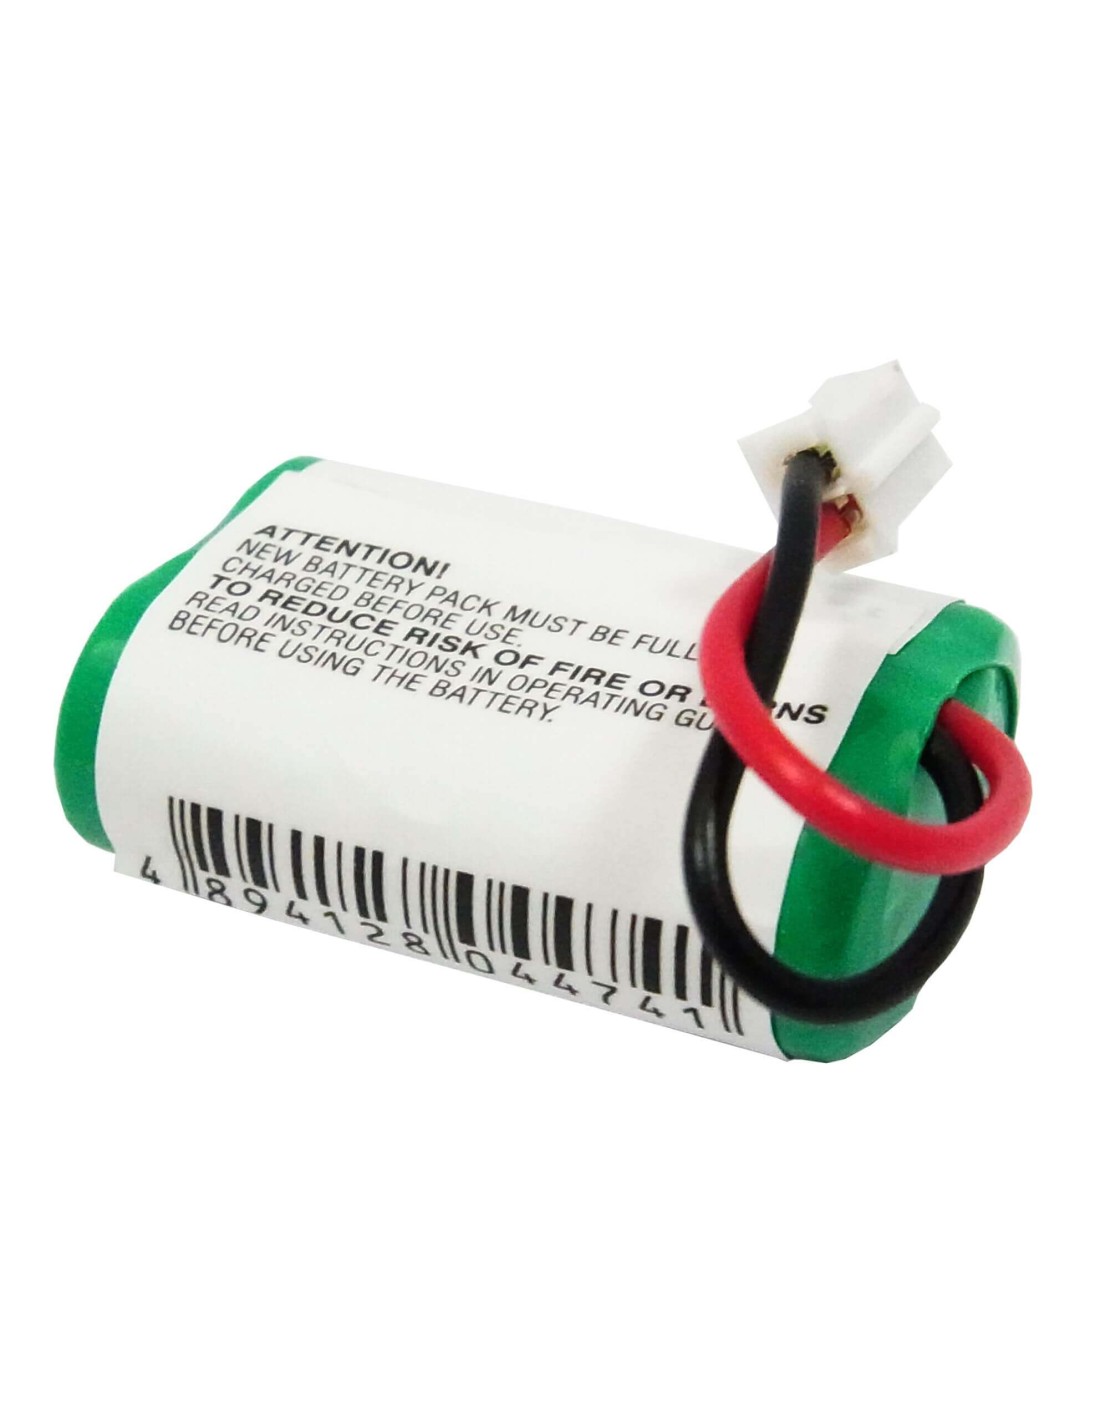 Battery for Sportdog Field Trainer Sd-400, Field Trainer Sd-400s 4.8V, 150mAh - 0.72Wh